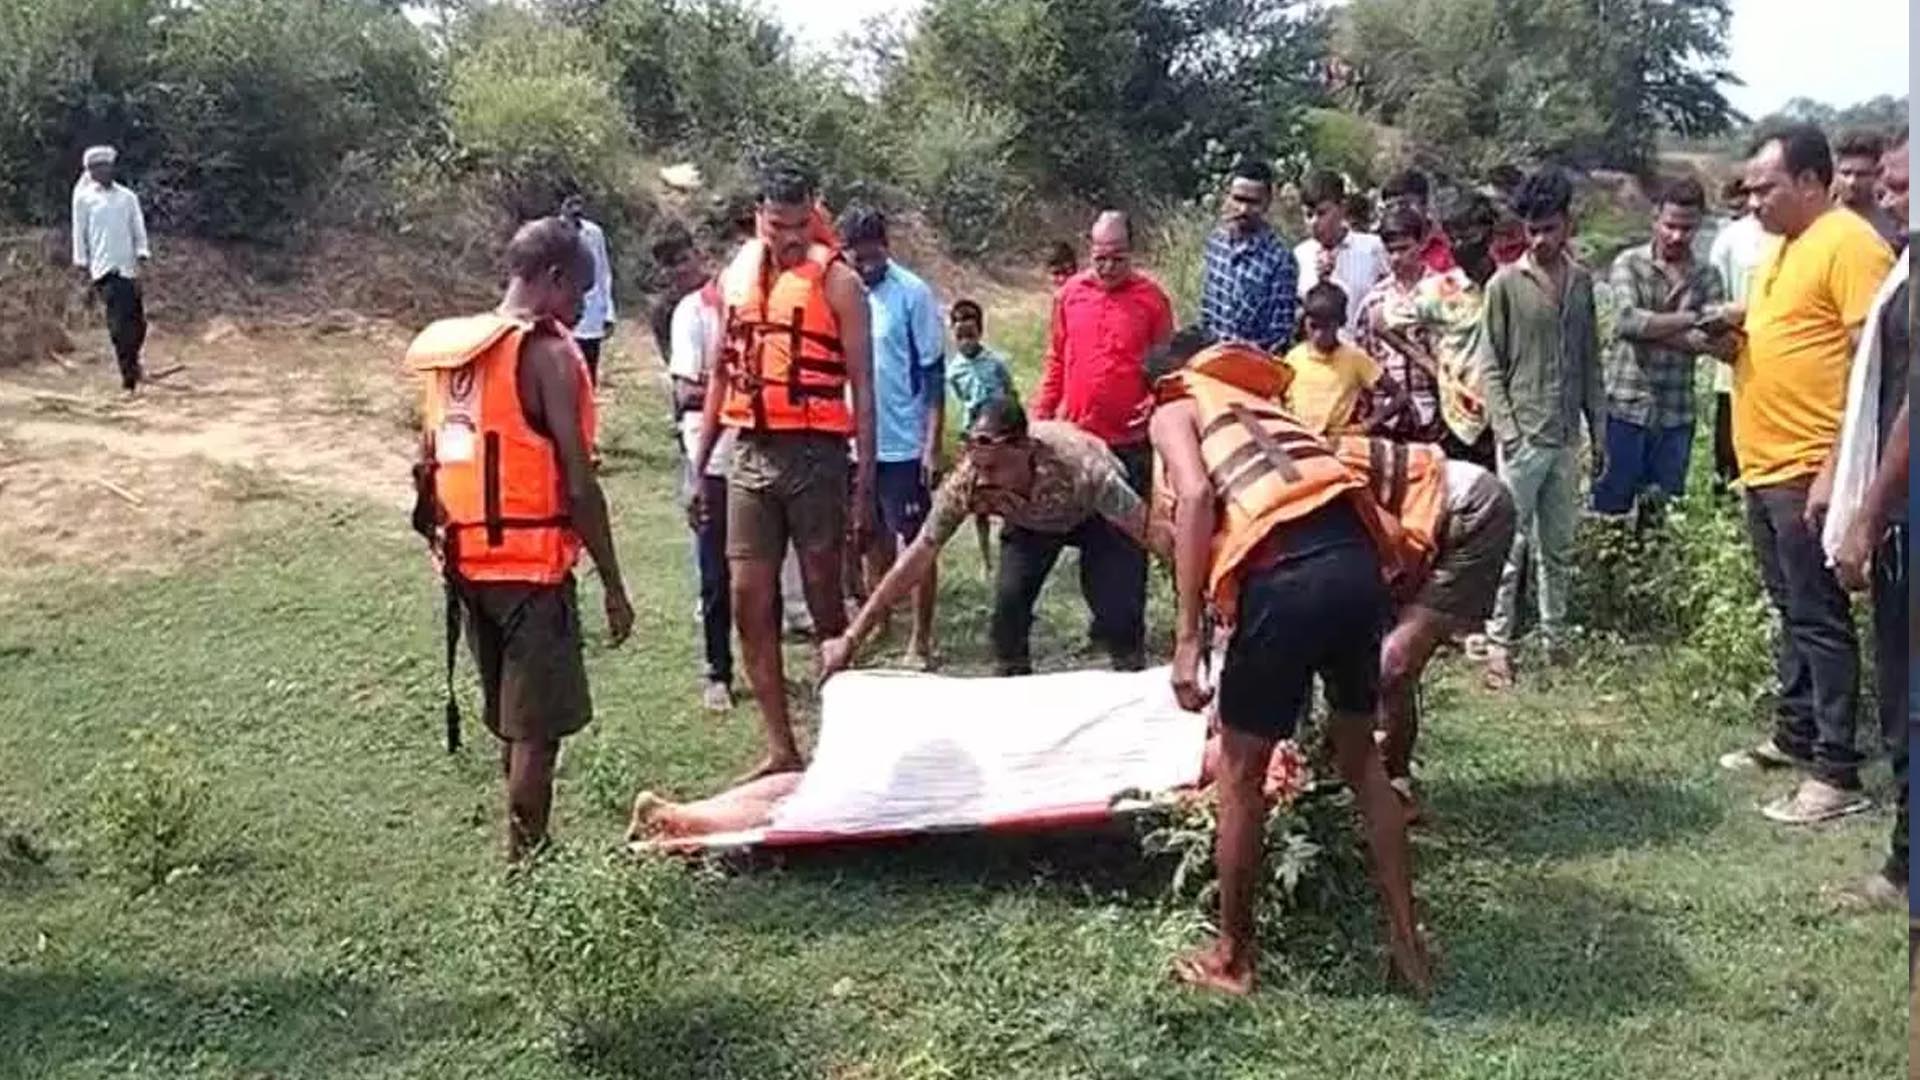 Young man reached Anicut slips, dies